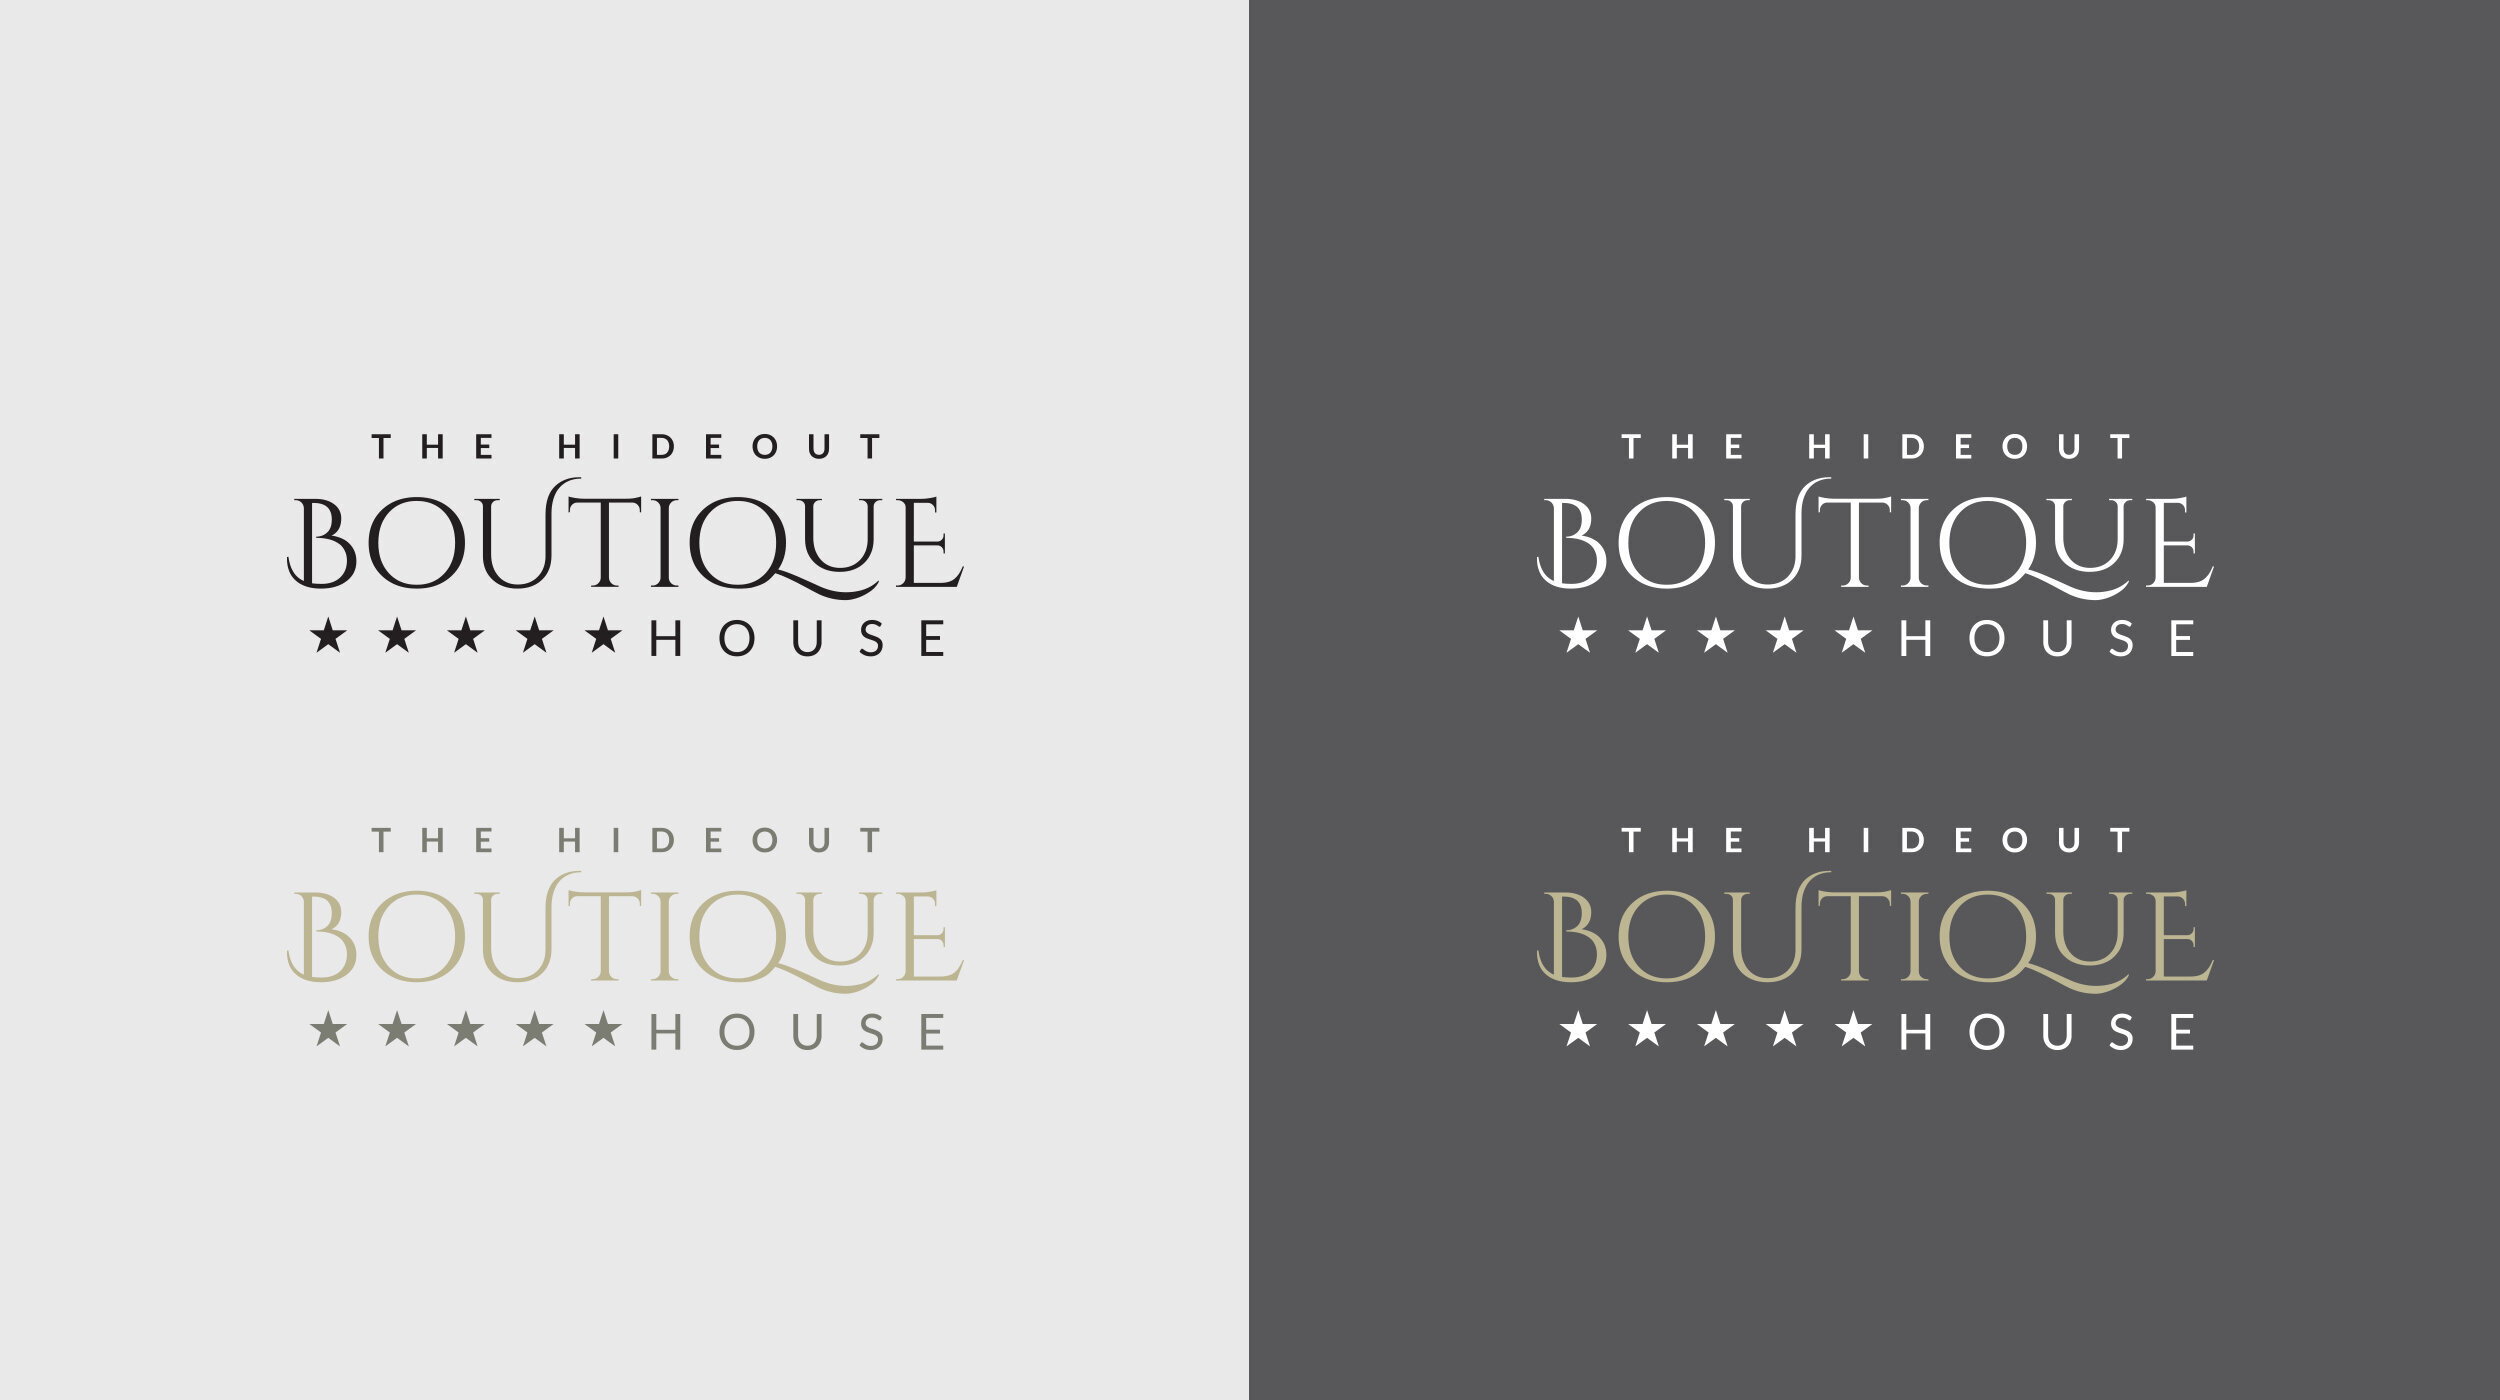 brand-strategy-design-the-hideout-boutique-house-adam-thorp-12.jpeg